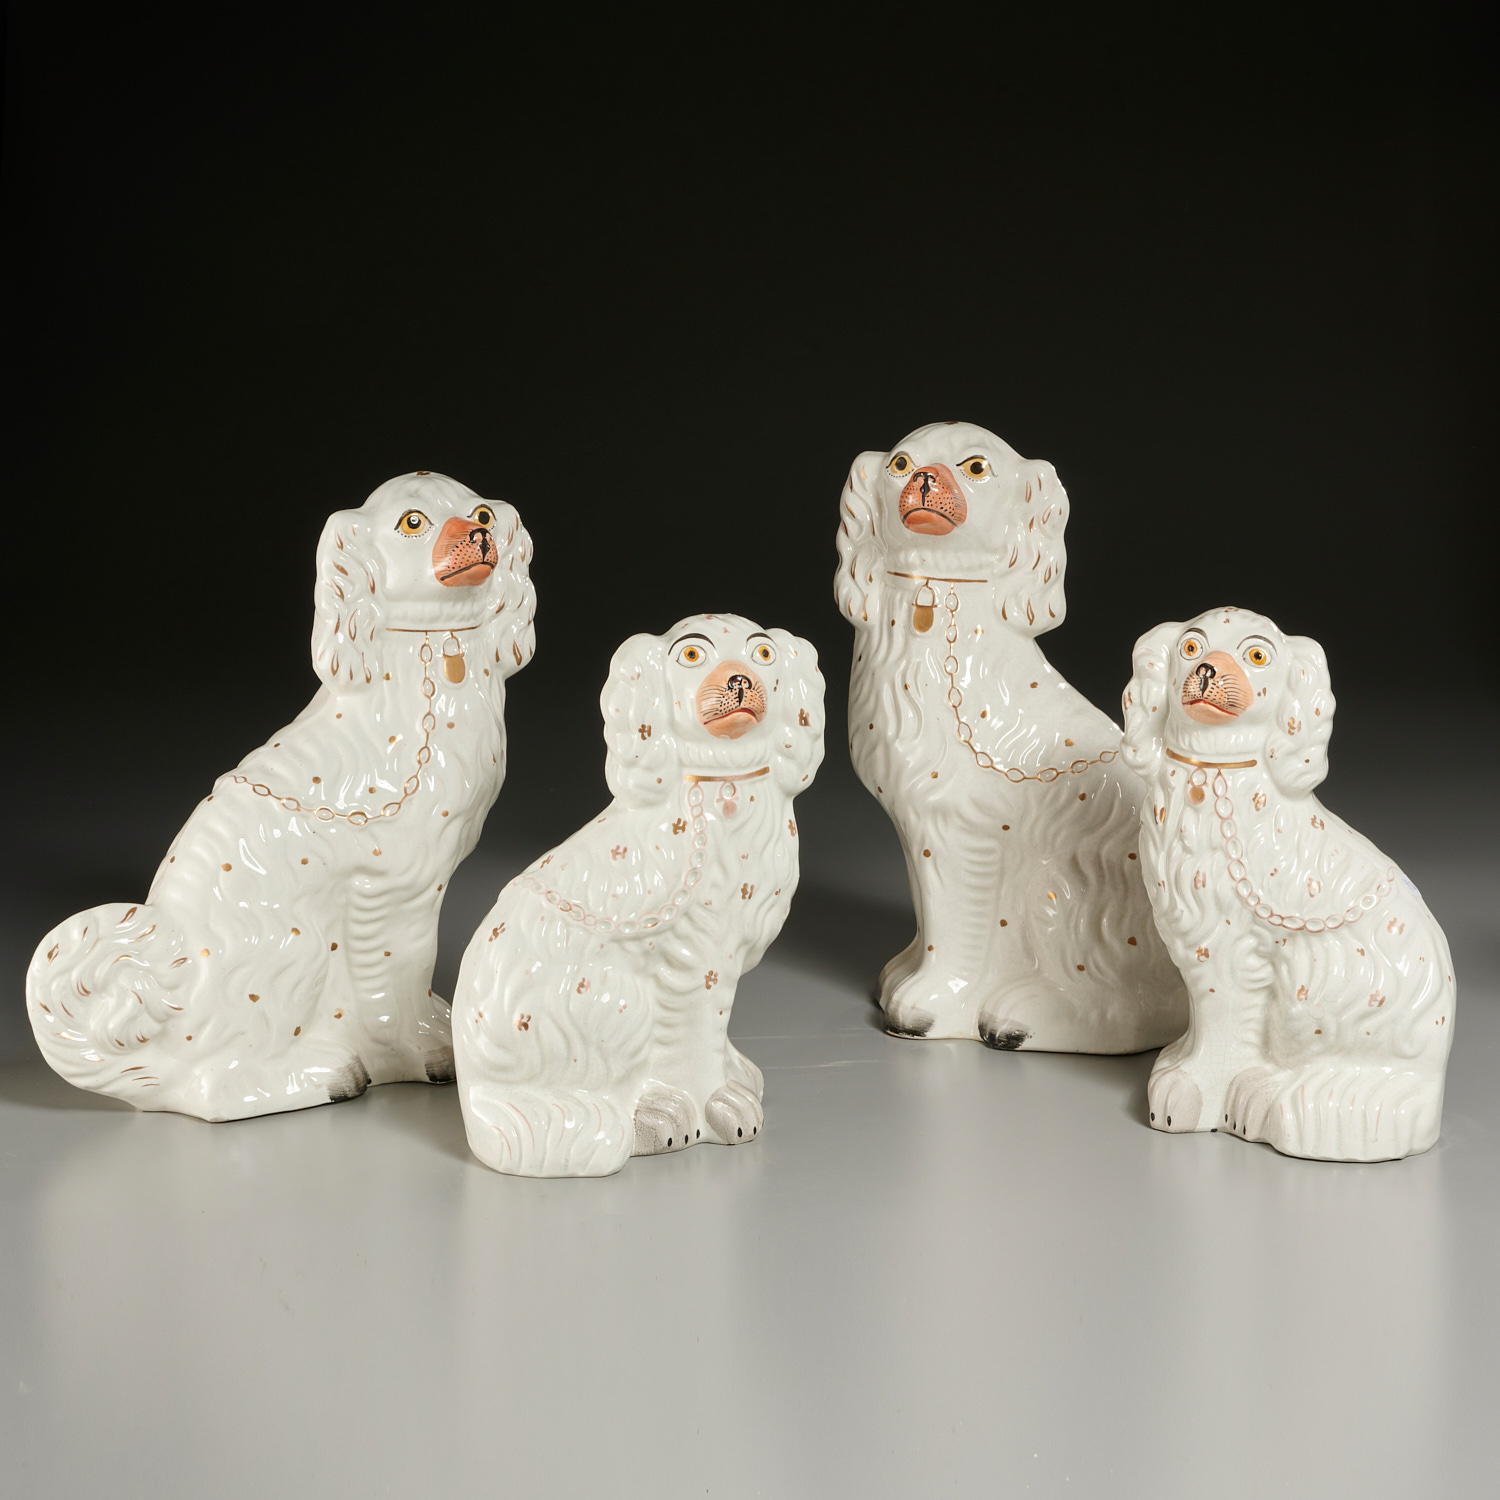 (2) PAIRS LARGE STAFFORDSHIRE POODLES